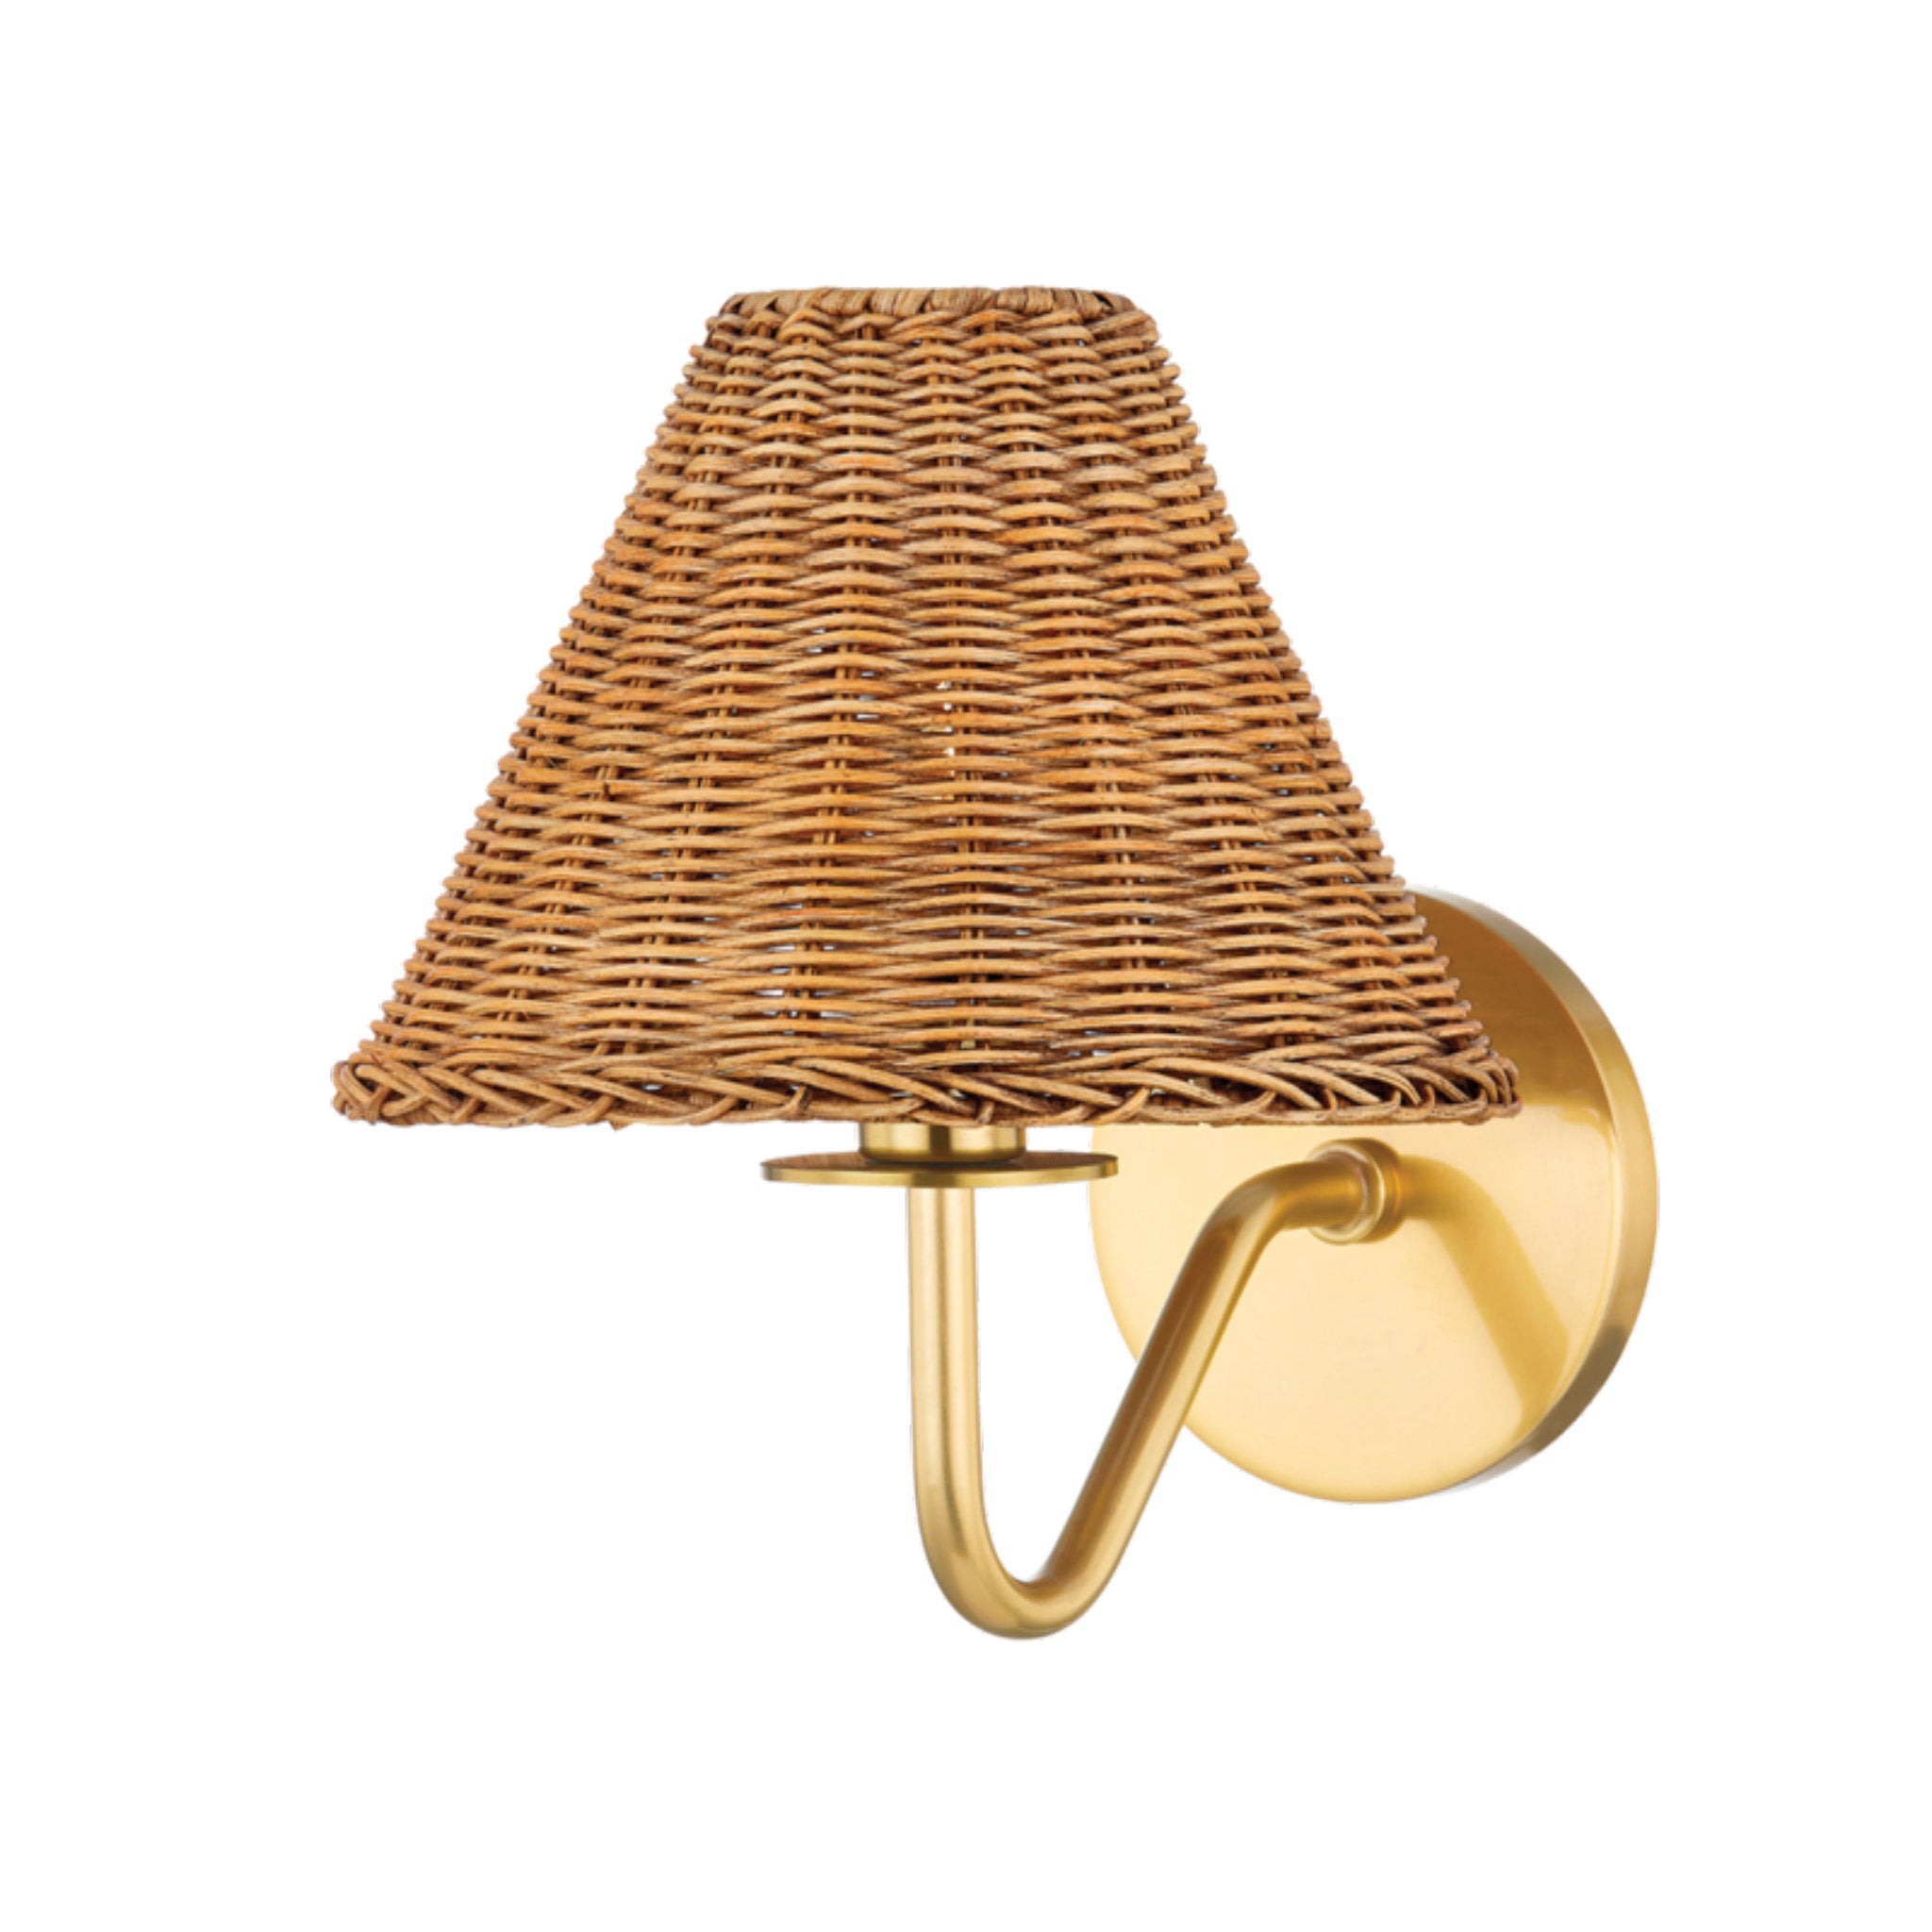 Issa 1 Light Wall Sconce in Aged Brass by Tali Roth